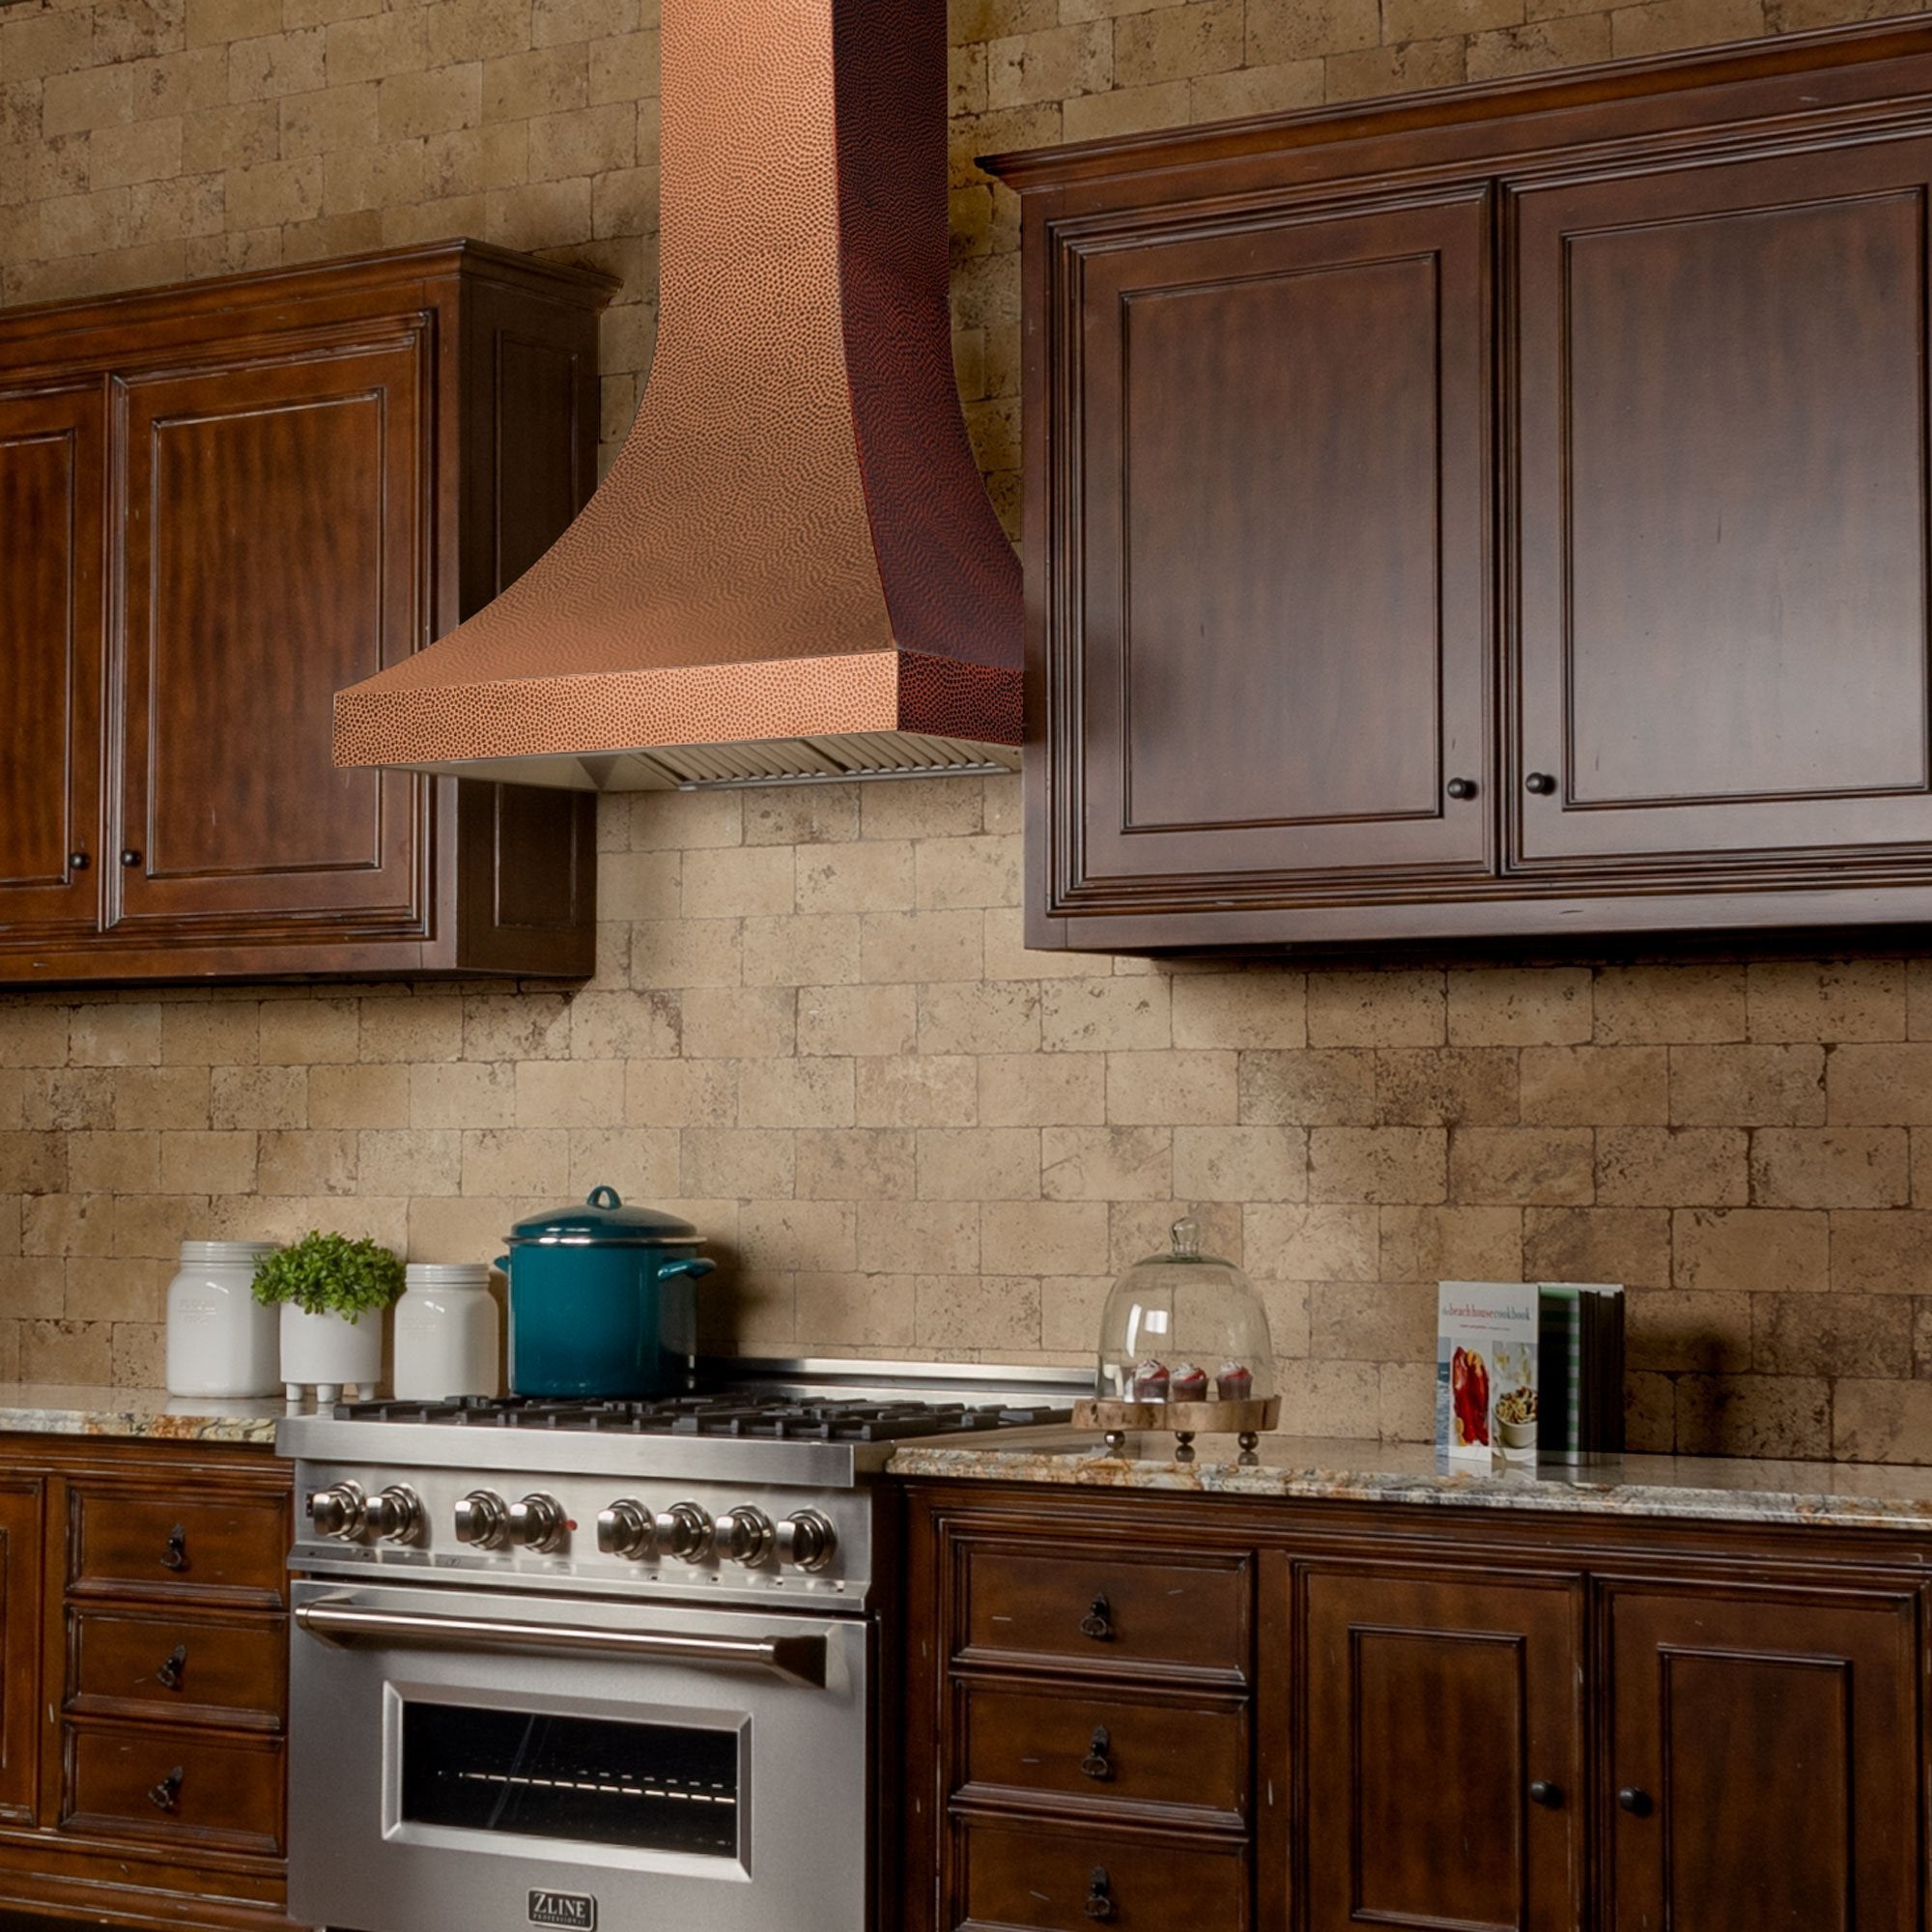 ZLINE Designer Series Hand-Hammered Copper Wall Mount Range Hood in a rustic kitchen with brown cabinets side.